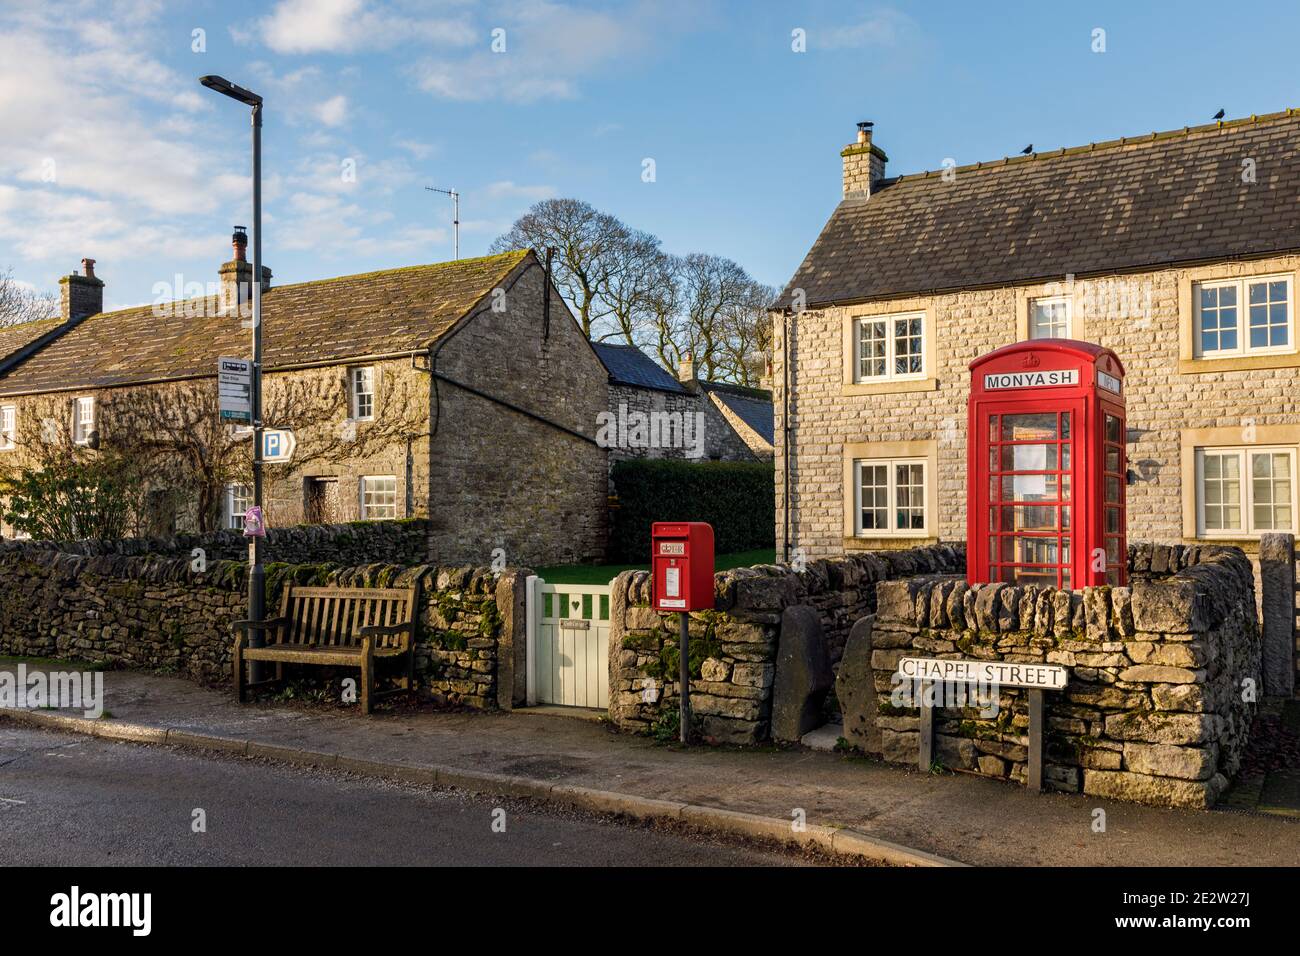 Postbox and telephone kiosk (now repurposed as a book exchange and information point), Monyash, Peak District National Park, Derbyshire Stock Photo